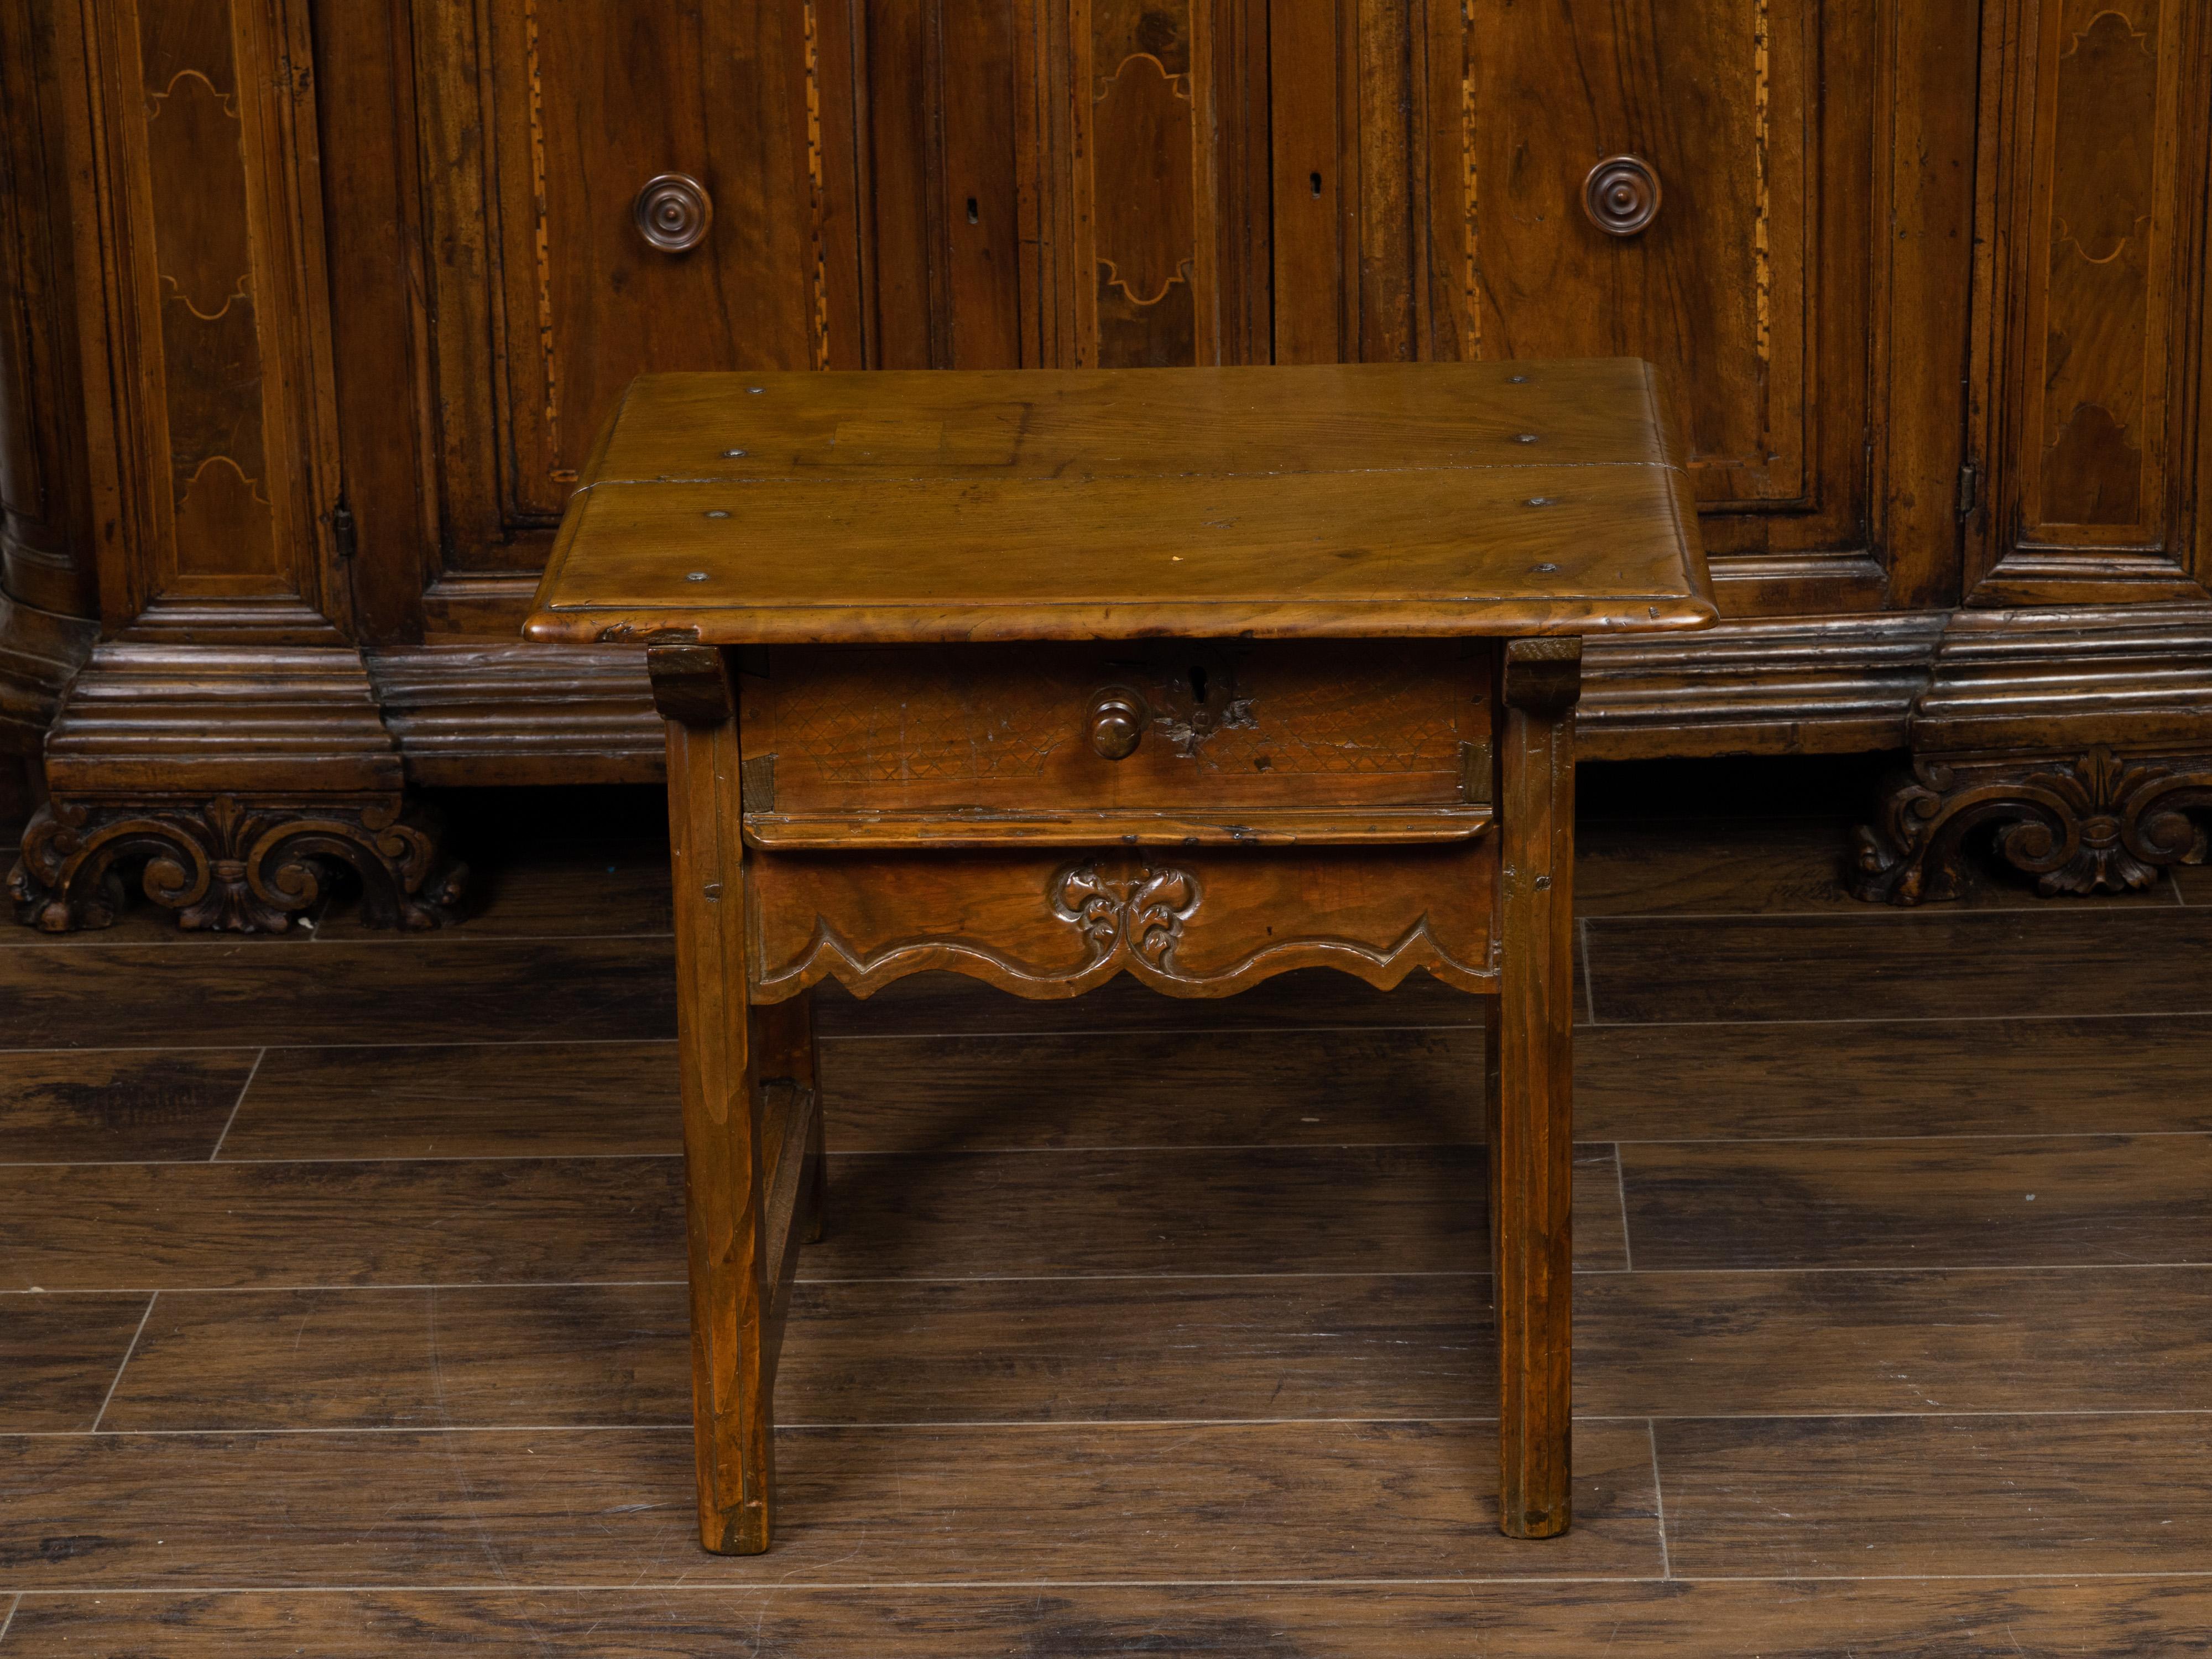 An English Georgian period oak low side table from the early 19th century, with single drawer and scalloped apron. Created in England during the early years of the 19th century, this oak side table features a rectangular planked top sitting above a